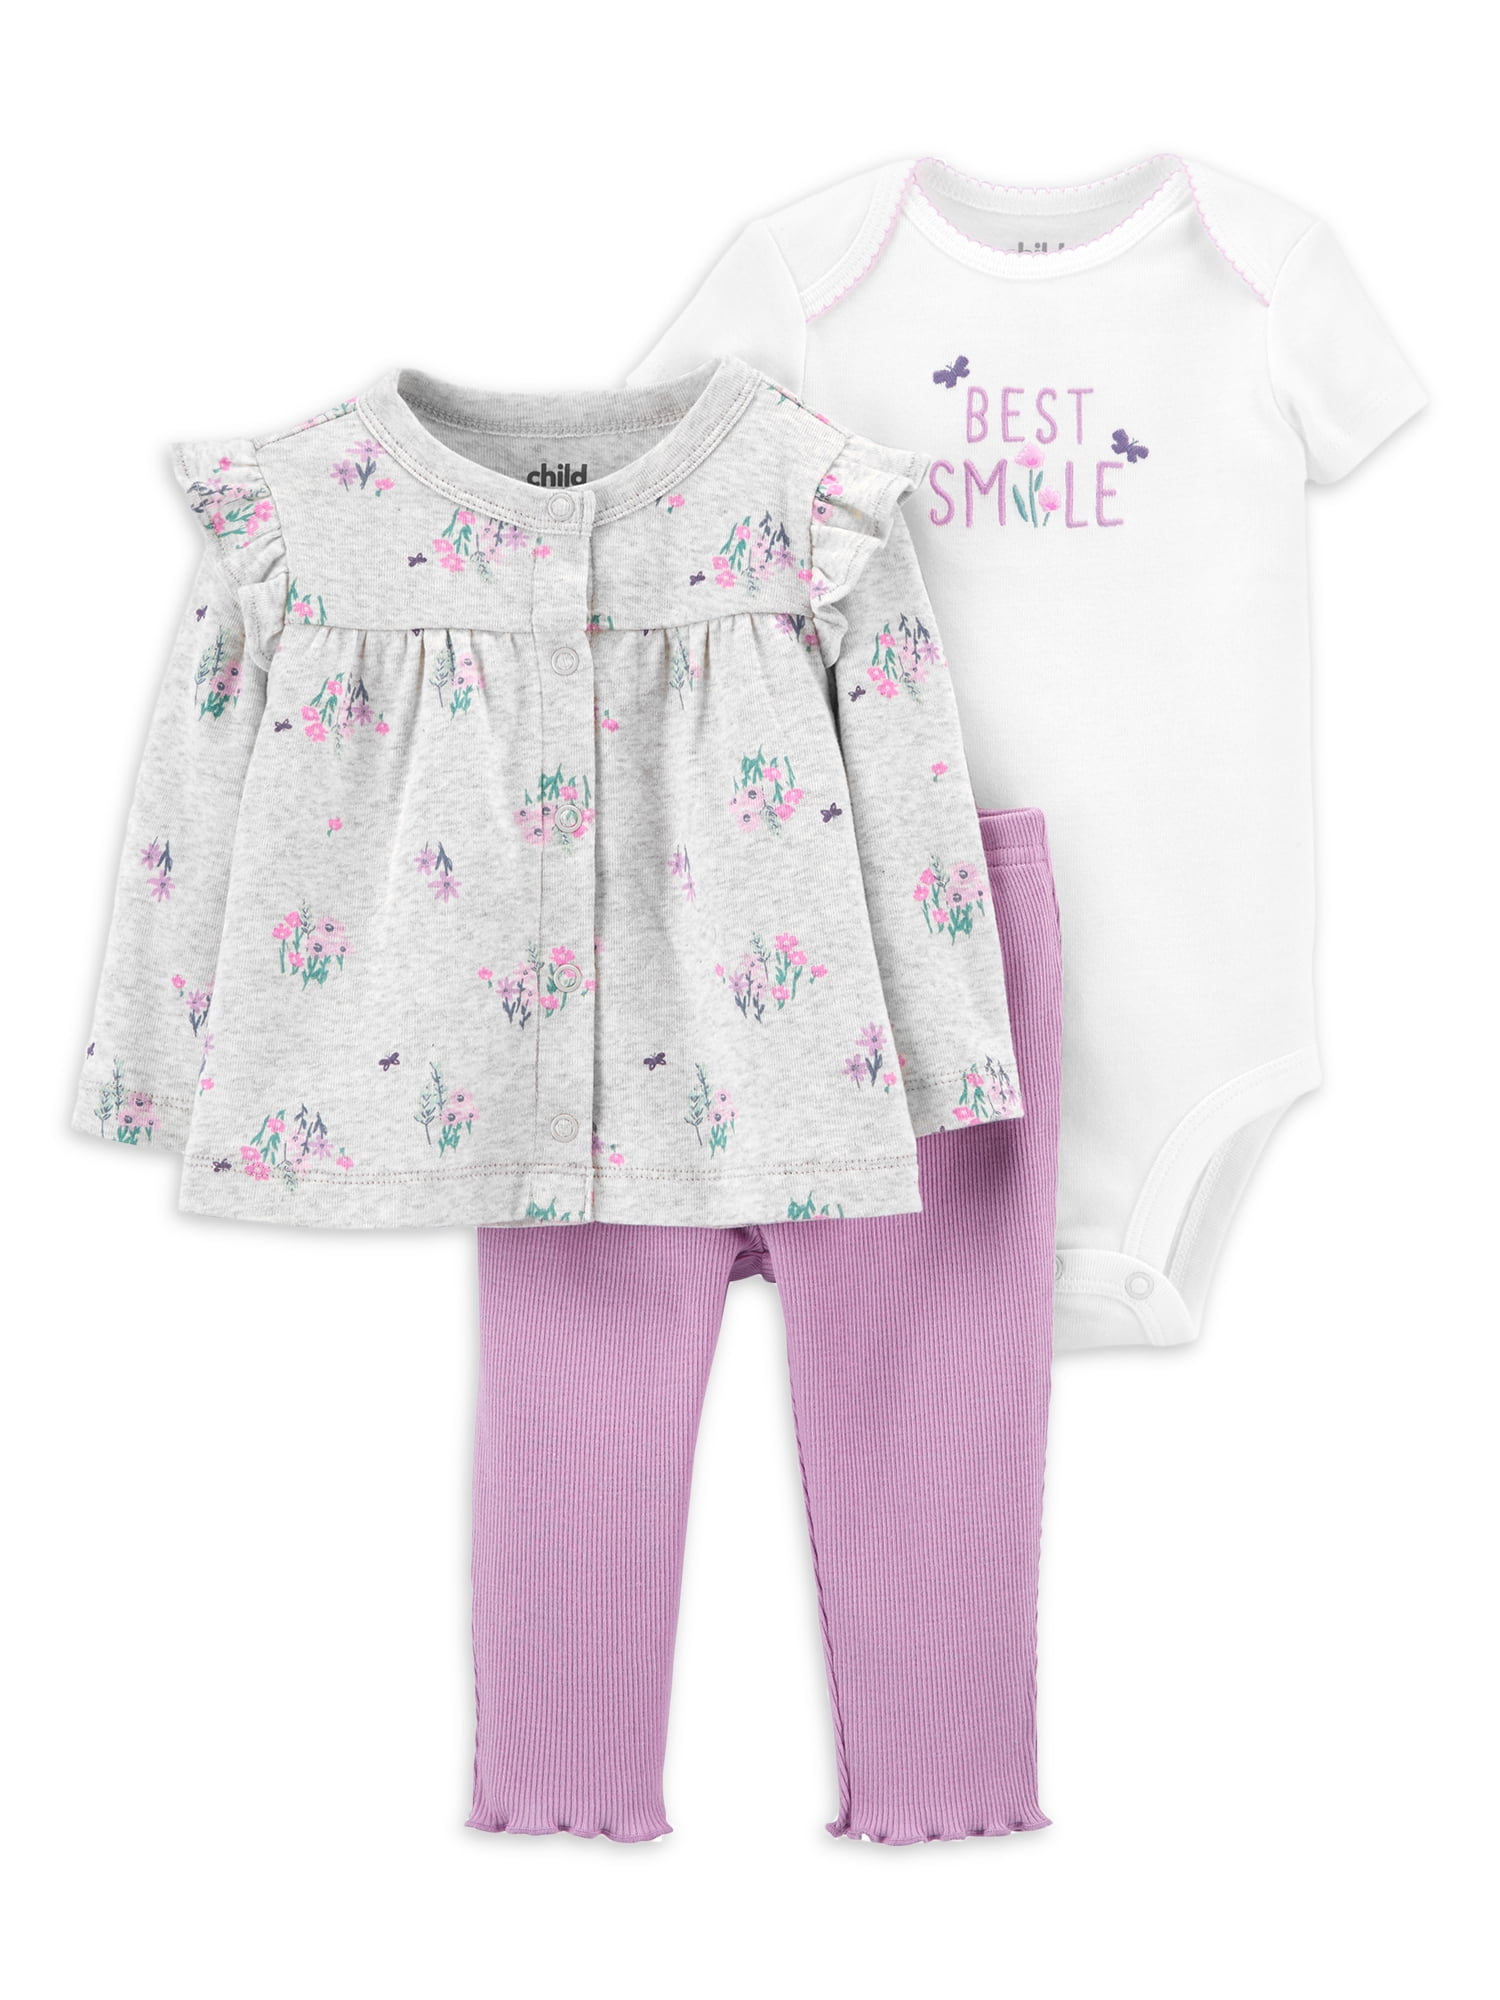 4 Preemie and Newborn Sizes Summertime Flowers Baby Girl 3 Piece Clothing Set 